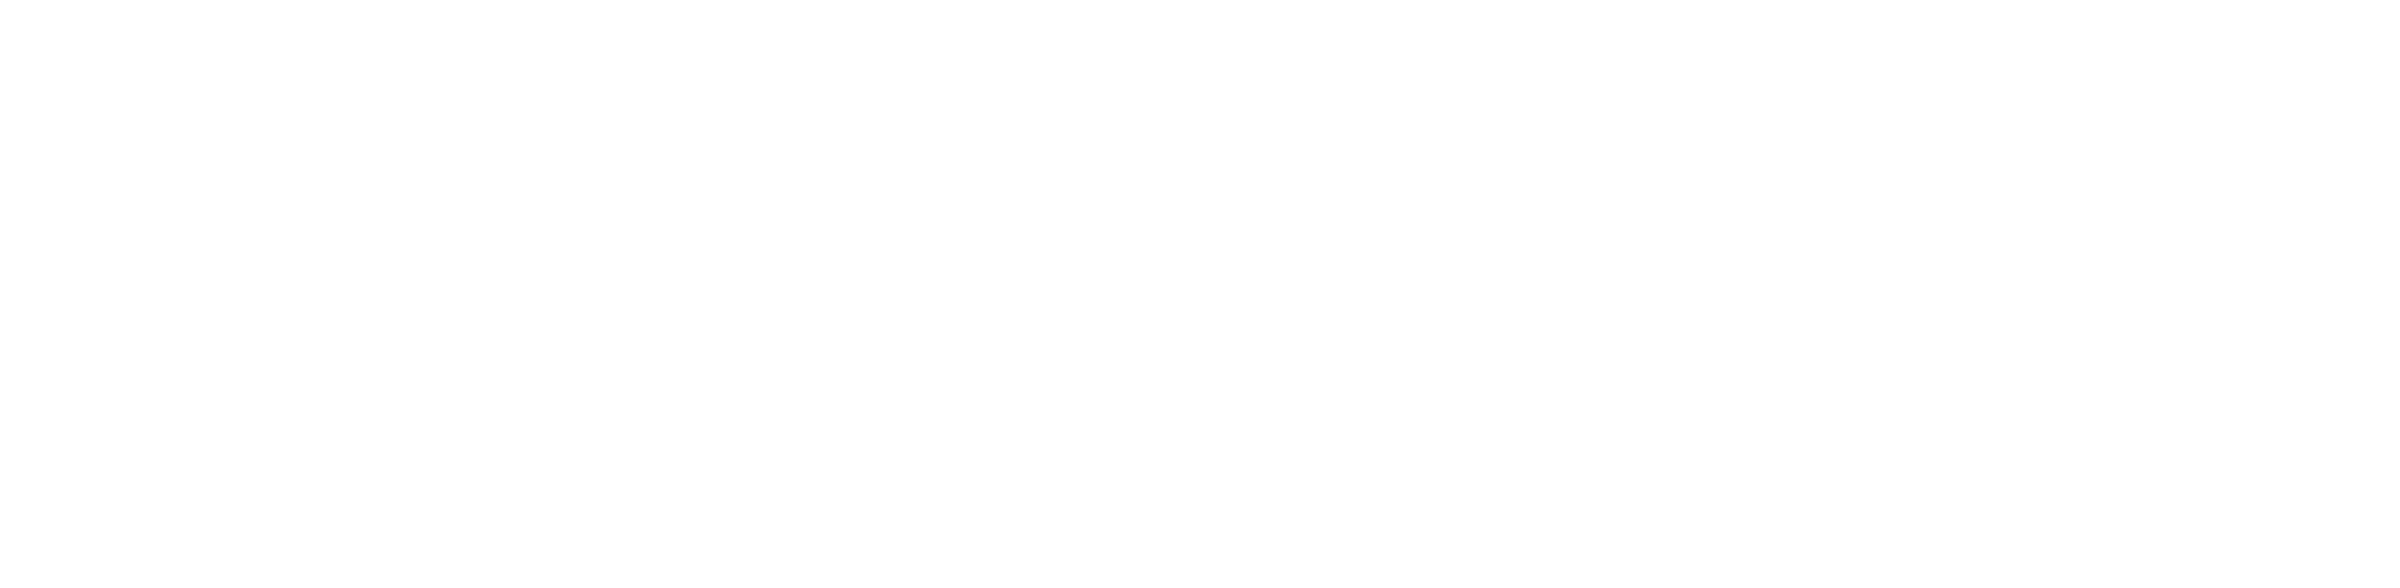 Nutcut Pictures